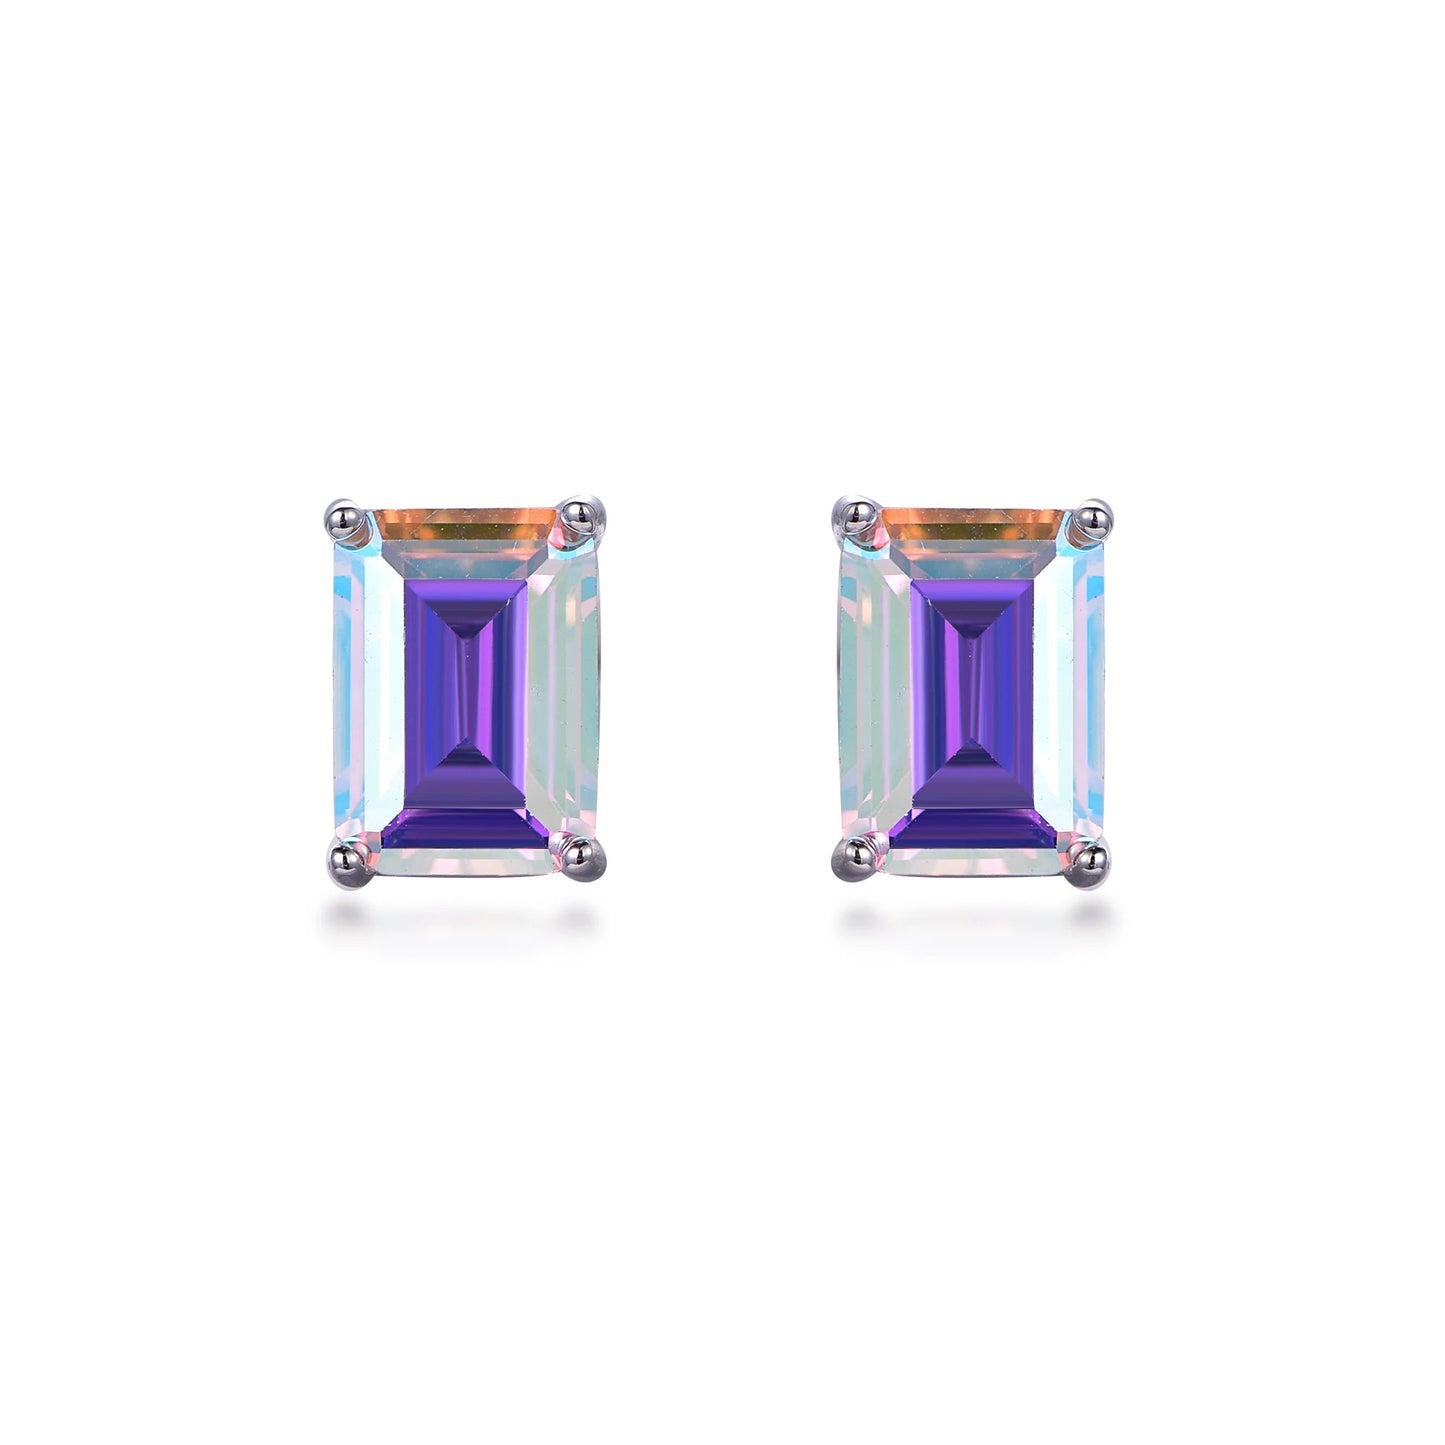 Square Gradient Color 5A CZ 925 Sterling Silver Cubic Zirconia Stud Earrings Kirin Jewelry